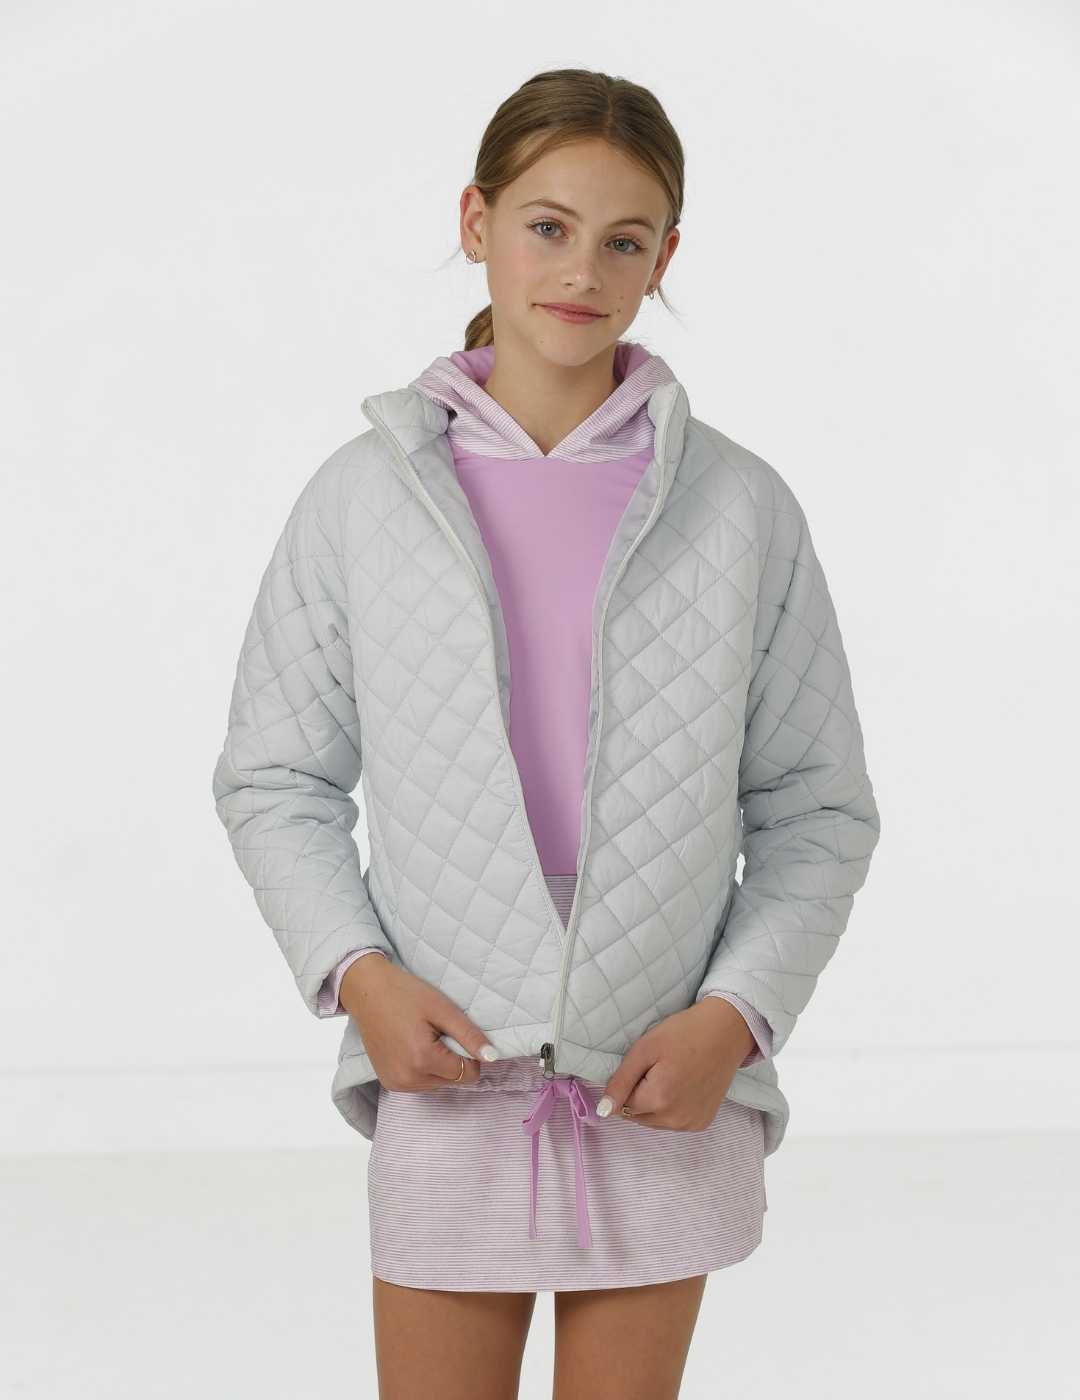 Alexa Youth Girls' Quilted Jacket